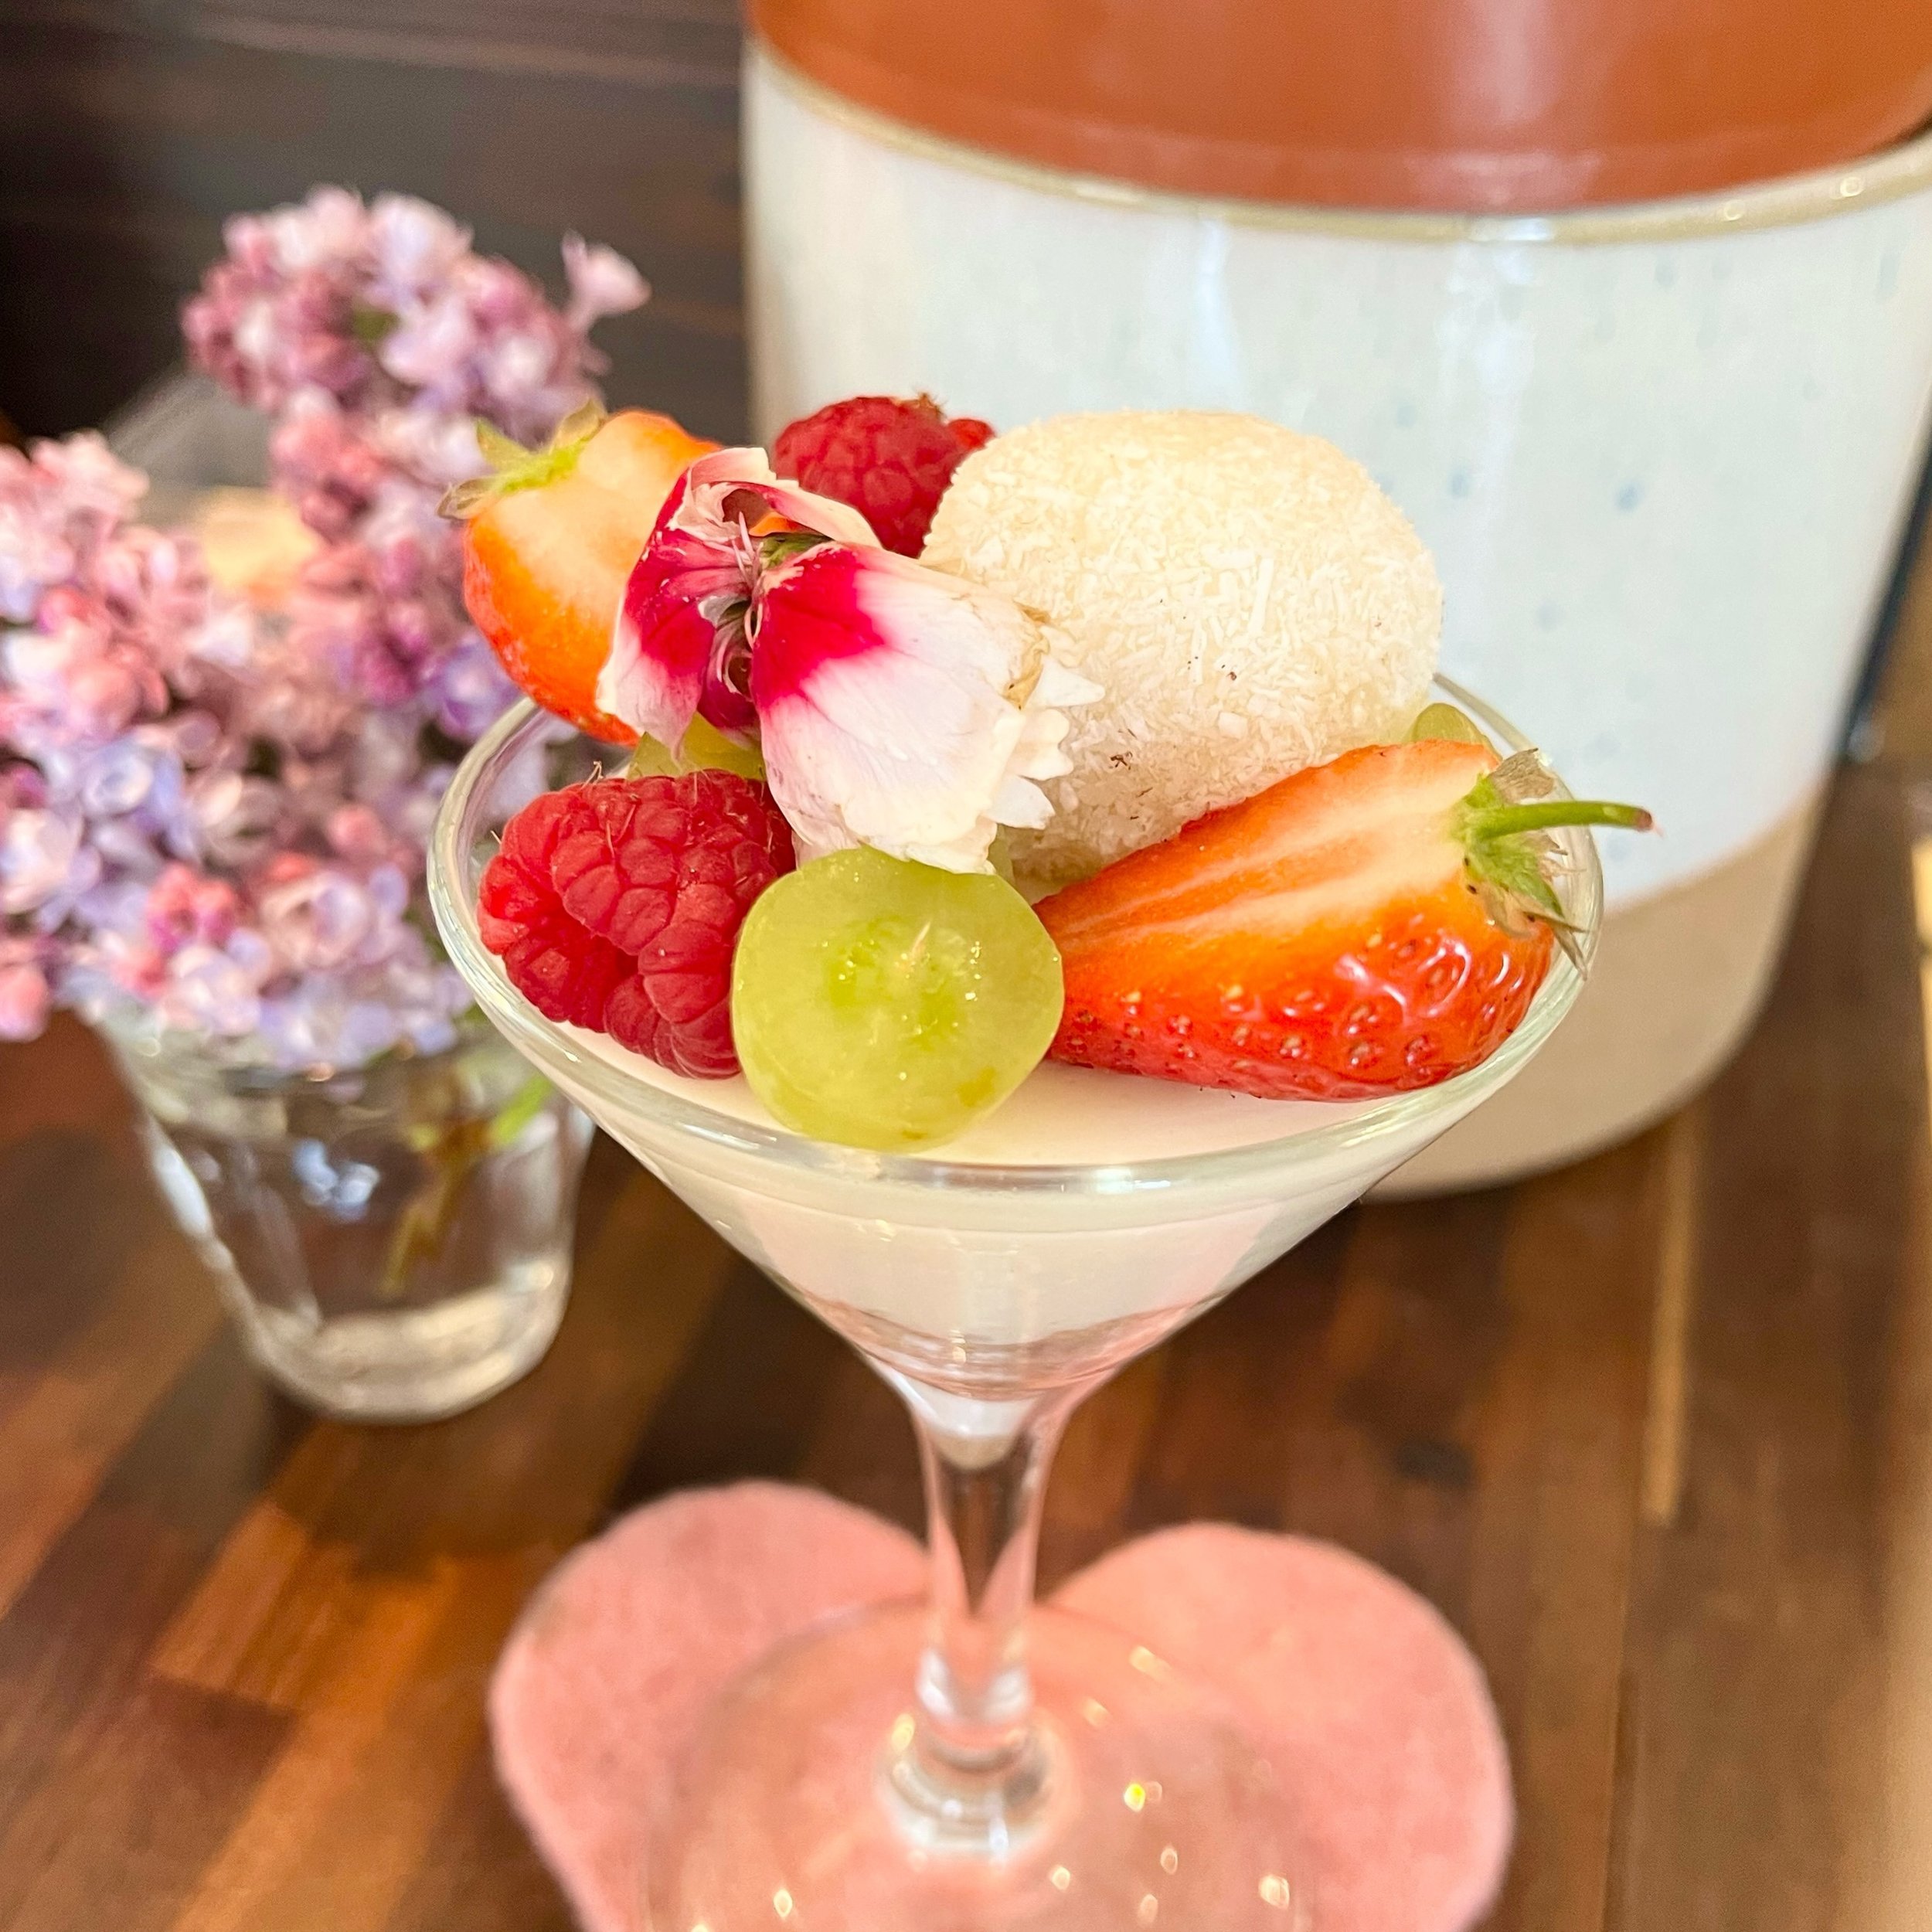 A special yuzu coconut mousse topped with fruits and coconut mochi 🥥🌴

#necco #neccolondon #exmouthmarket #islingtonrestaurants #londonfood #londonfoodie #londoneats #everylastmouthful